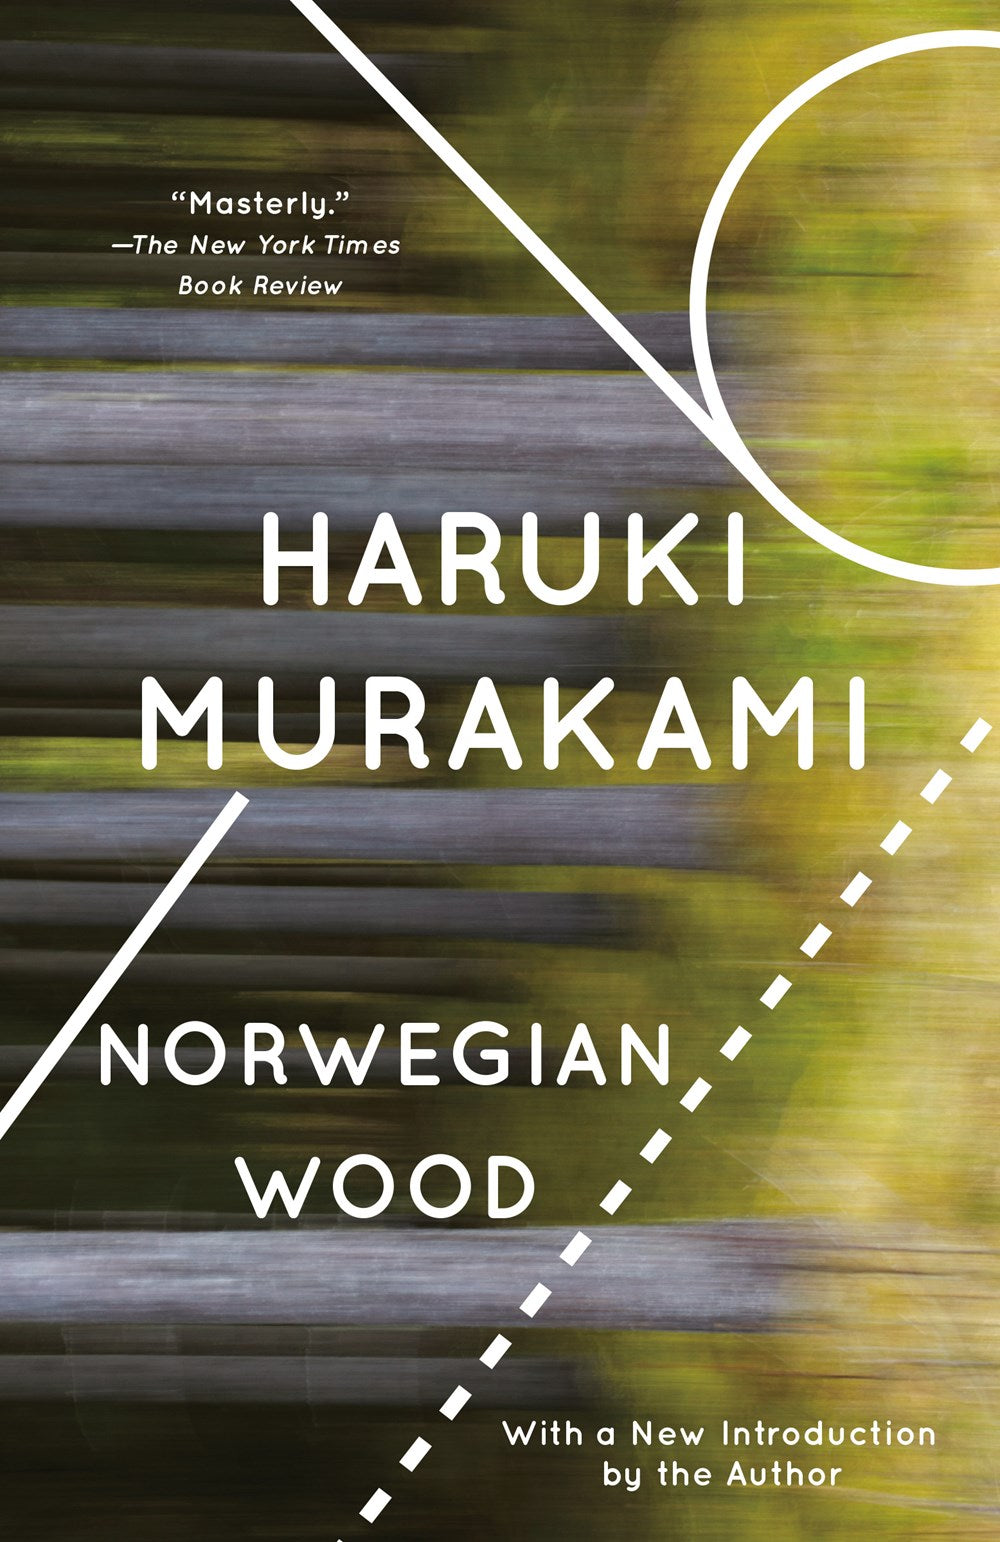 Norweigan Wood by Haruki Murakami (with a New Introducution by the Author)